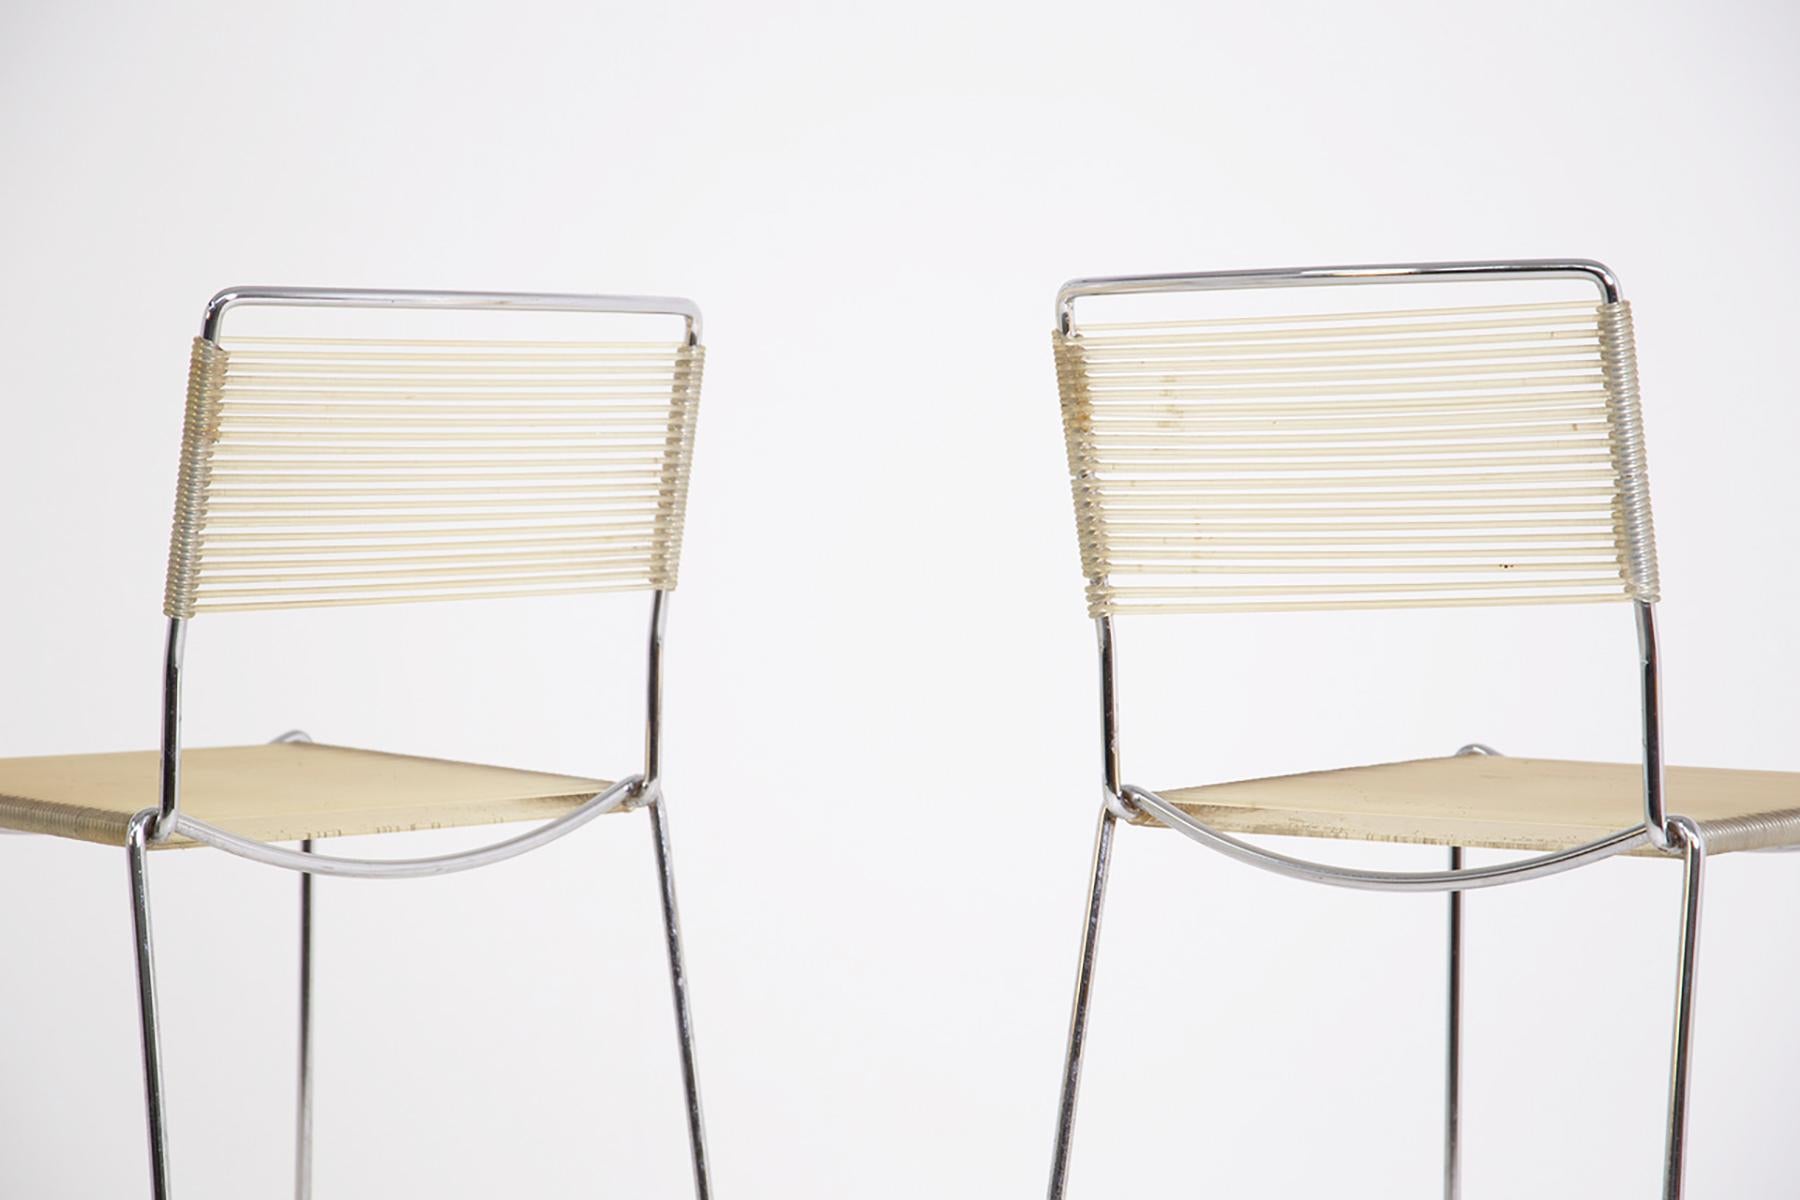 Wonderful set consisting of 4 tall chairs by the great designer Kazuhide Takahama from 1970.
The beautiful chairs Kazuhide Takahama were made with chrome-plated tubular steel and cream-colored plastic wires, which, wrapped and joined next to each